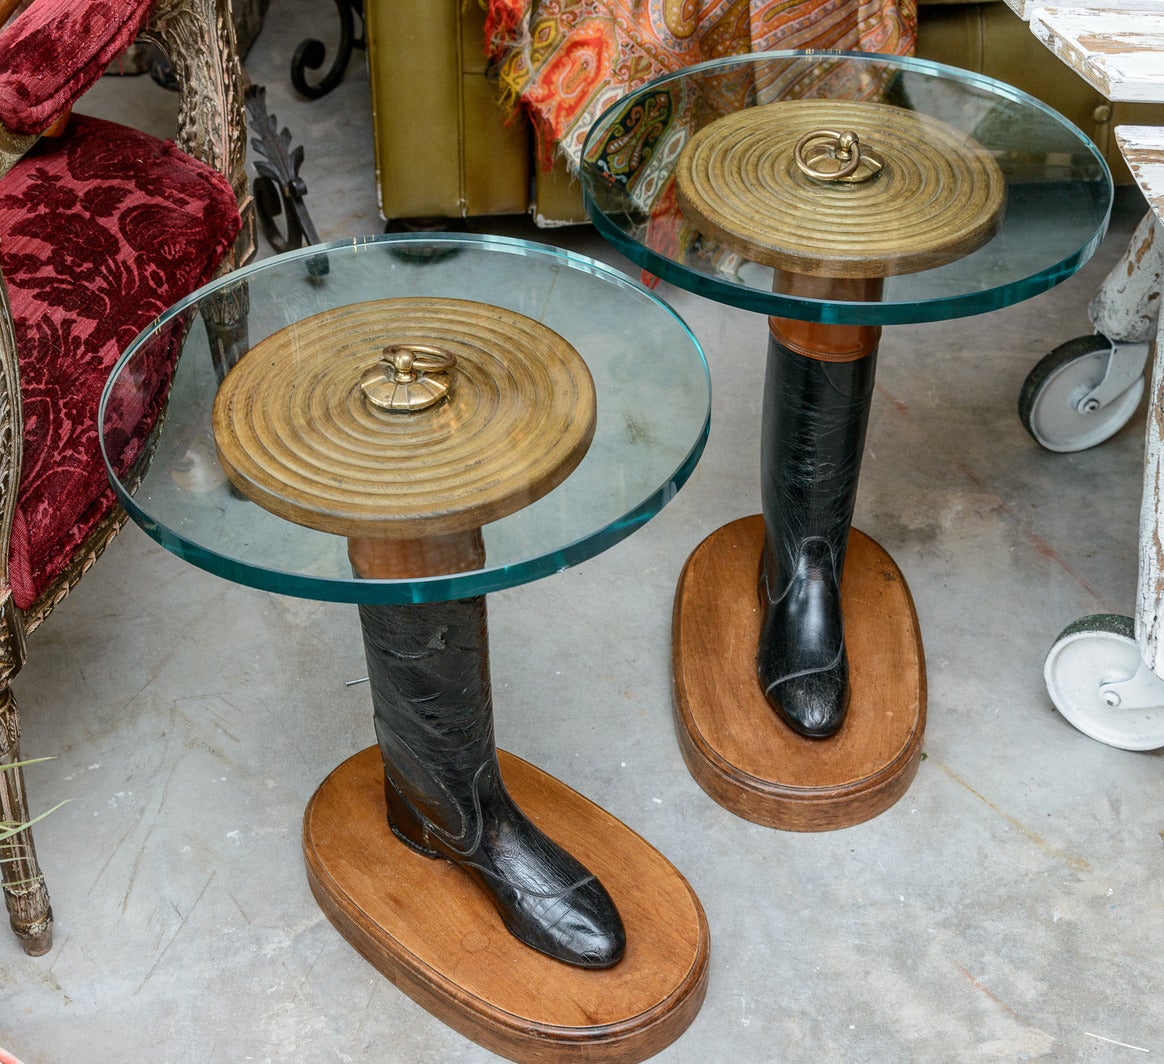 Two carved and painted wooden side tables. Bronze base supporting the circular glass top.